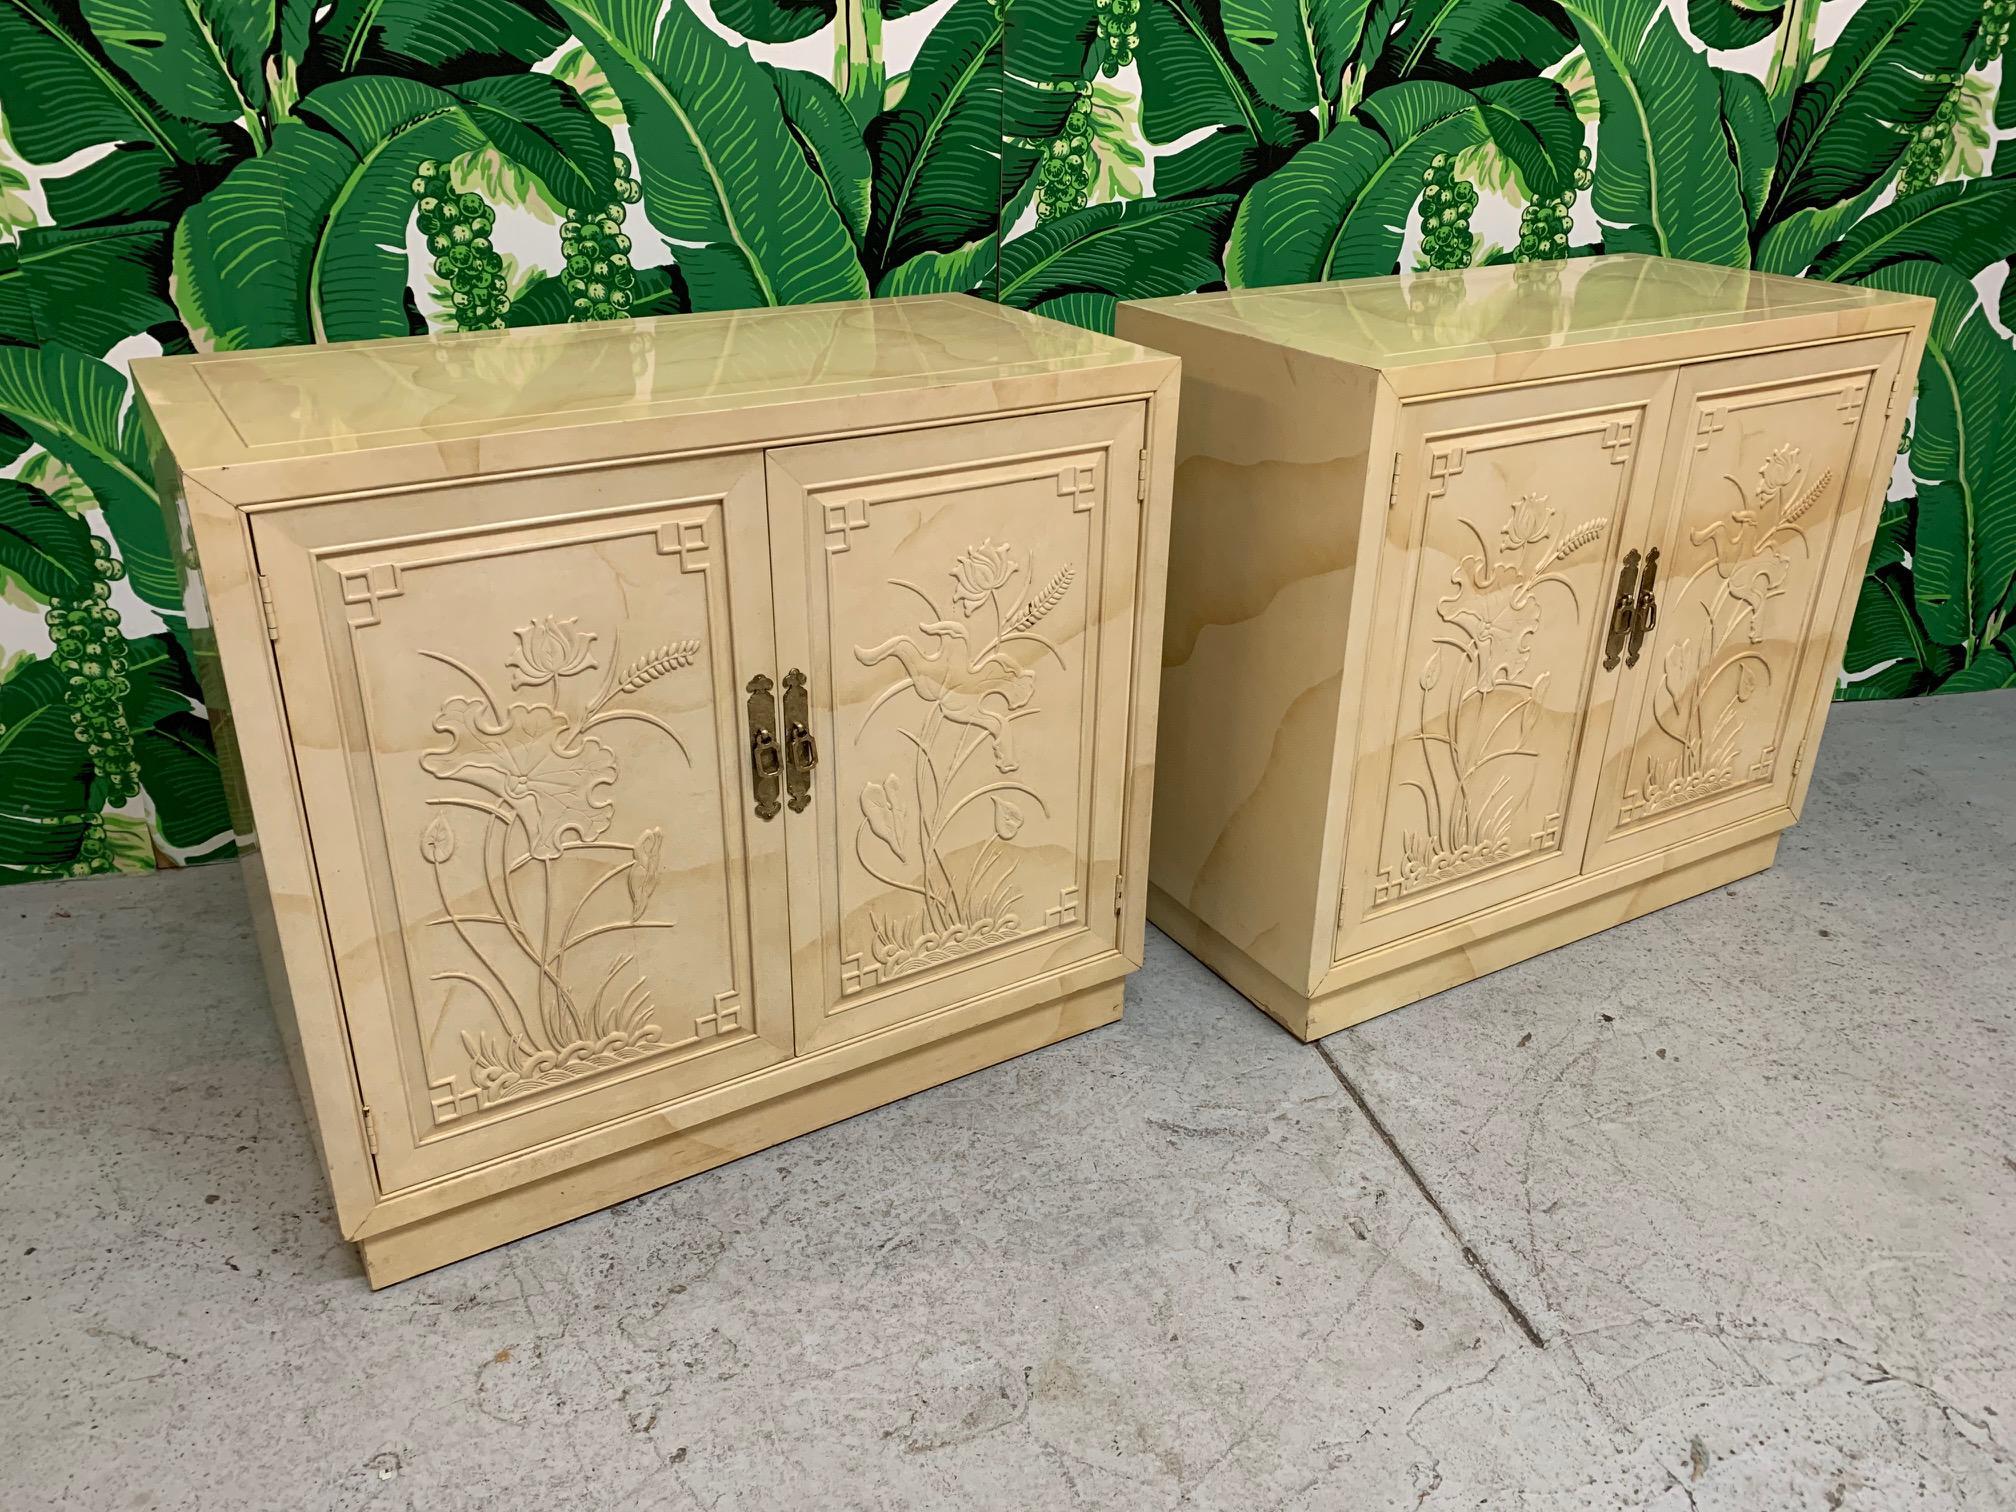 Pair of chinoiserie style cabinets by Henredon from the Folio 16 collection. Can be used as bunching chests or separately. Top drawer has Henredon felt flatware organizer still in original plastic. Cabinets in very good vintage condition with minor